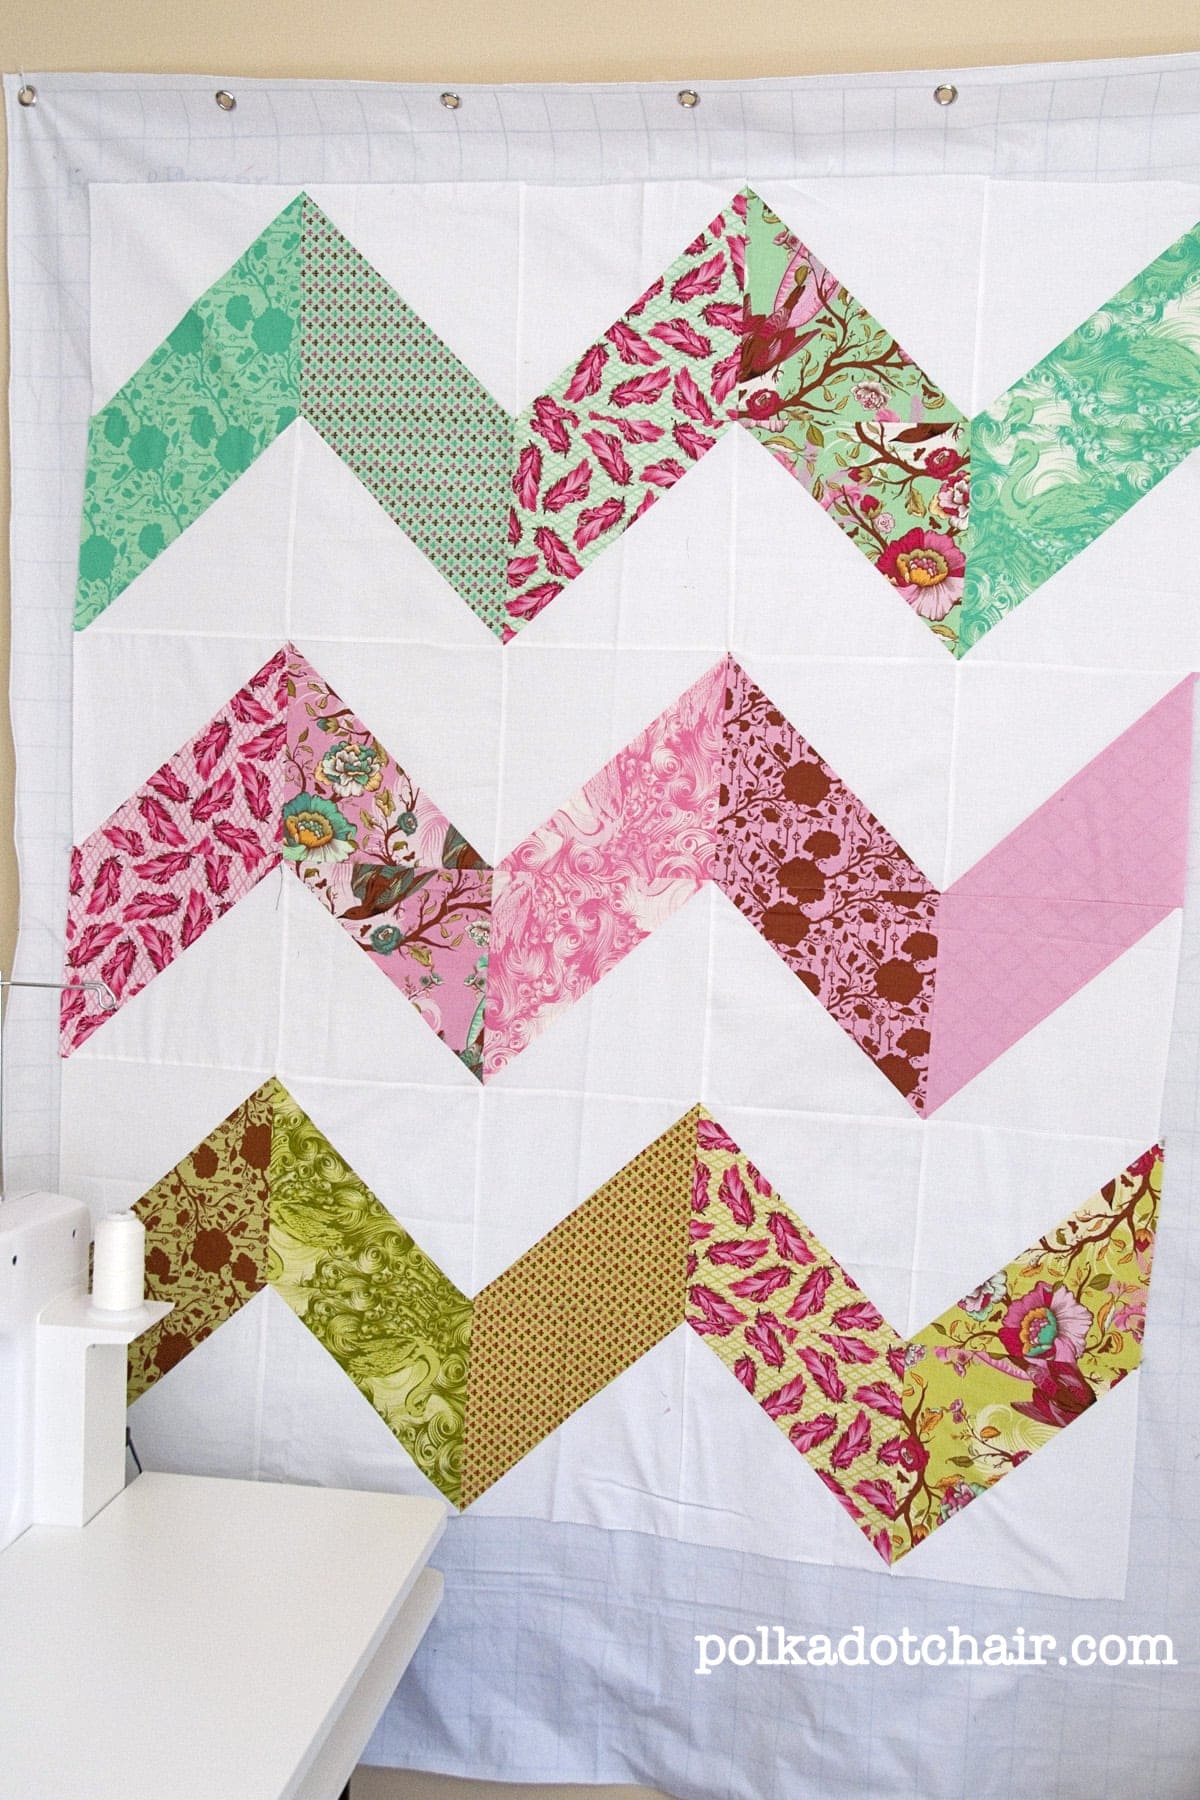 A finished Zig Zag quilt top